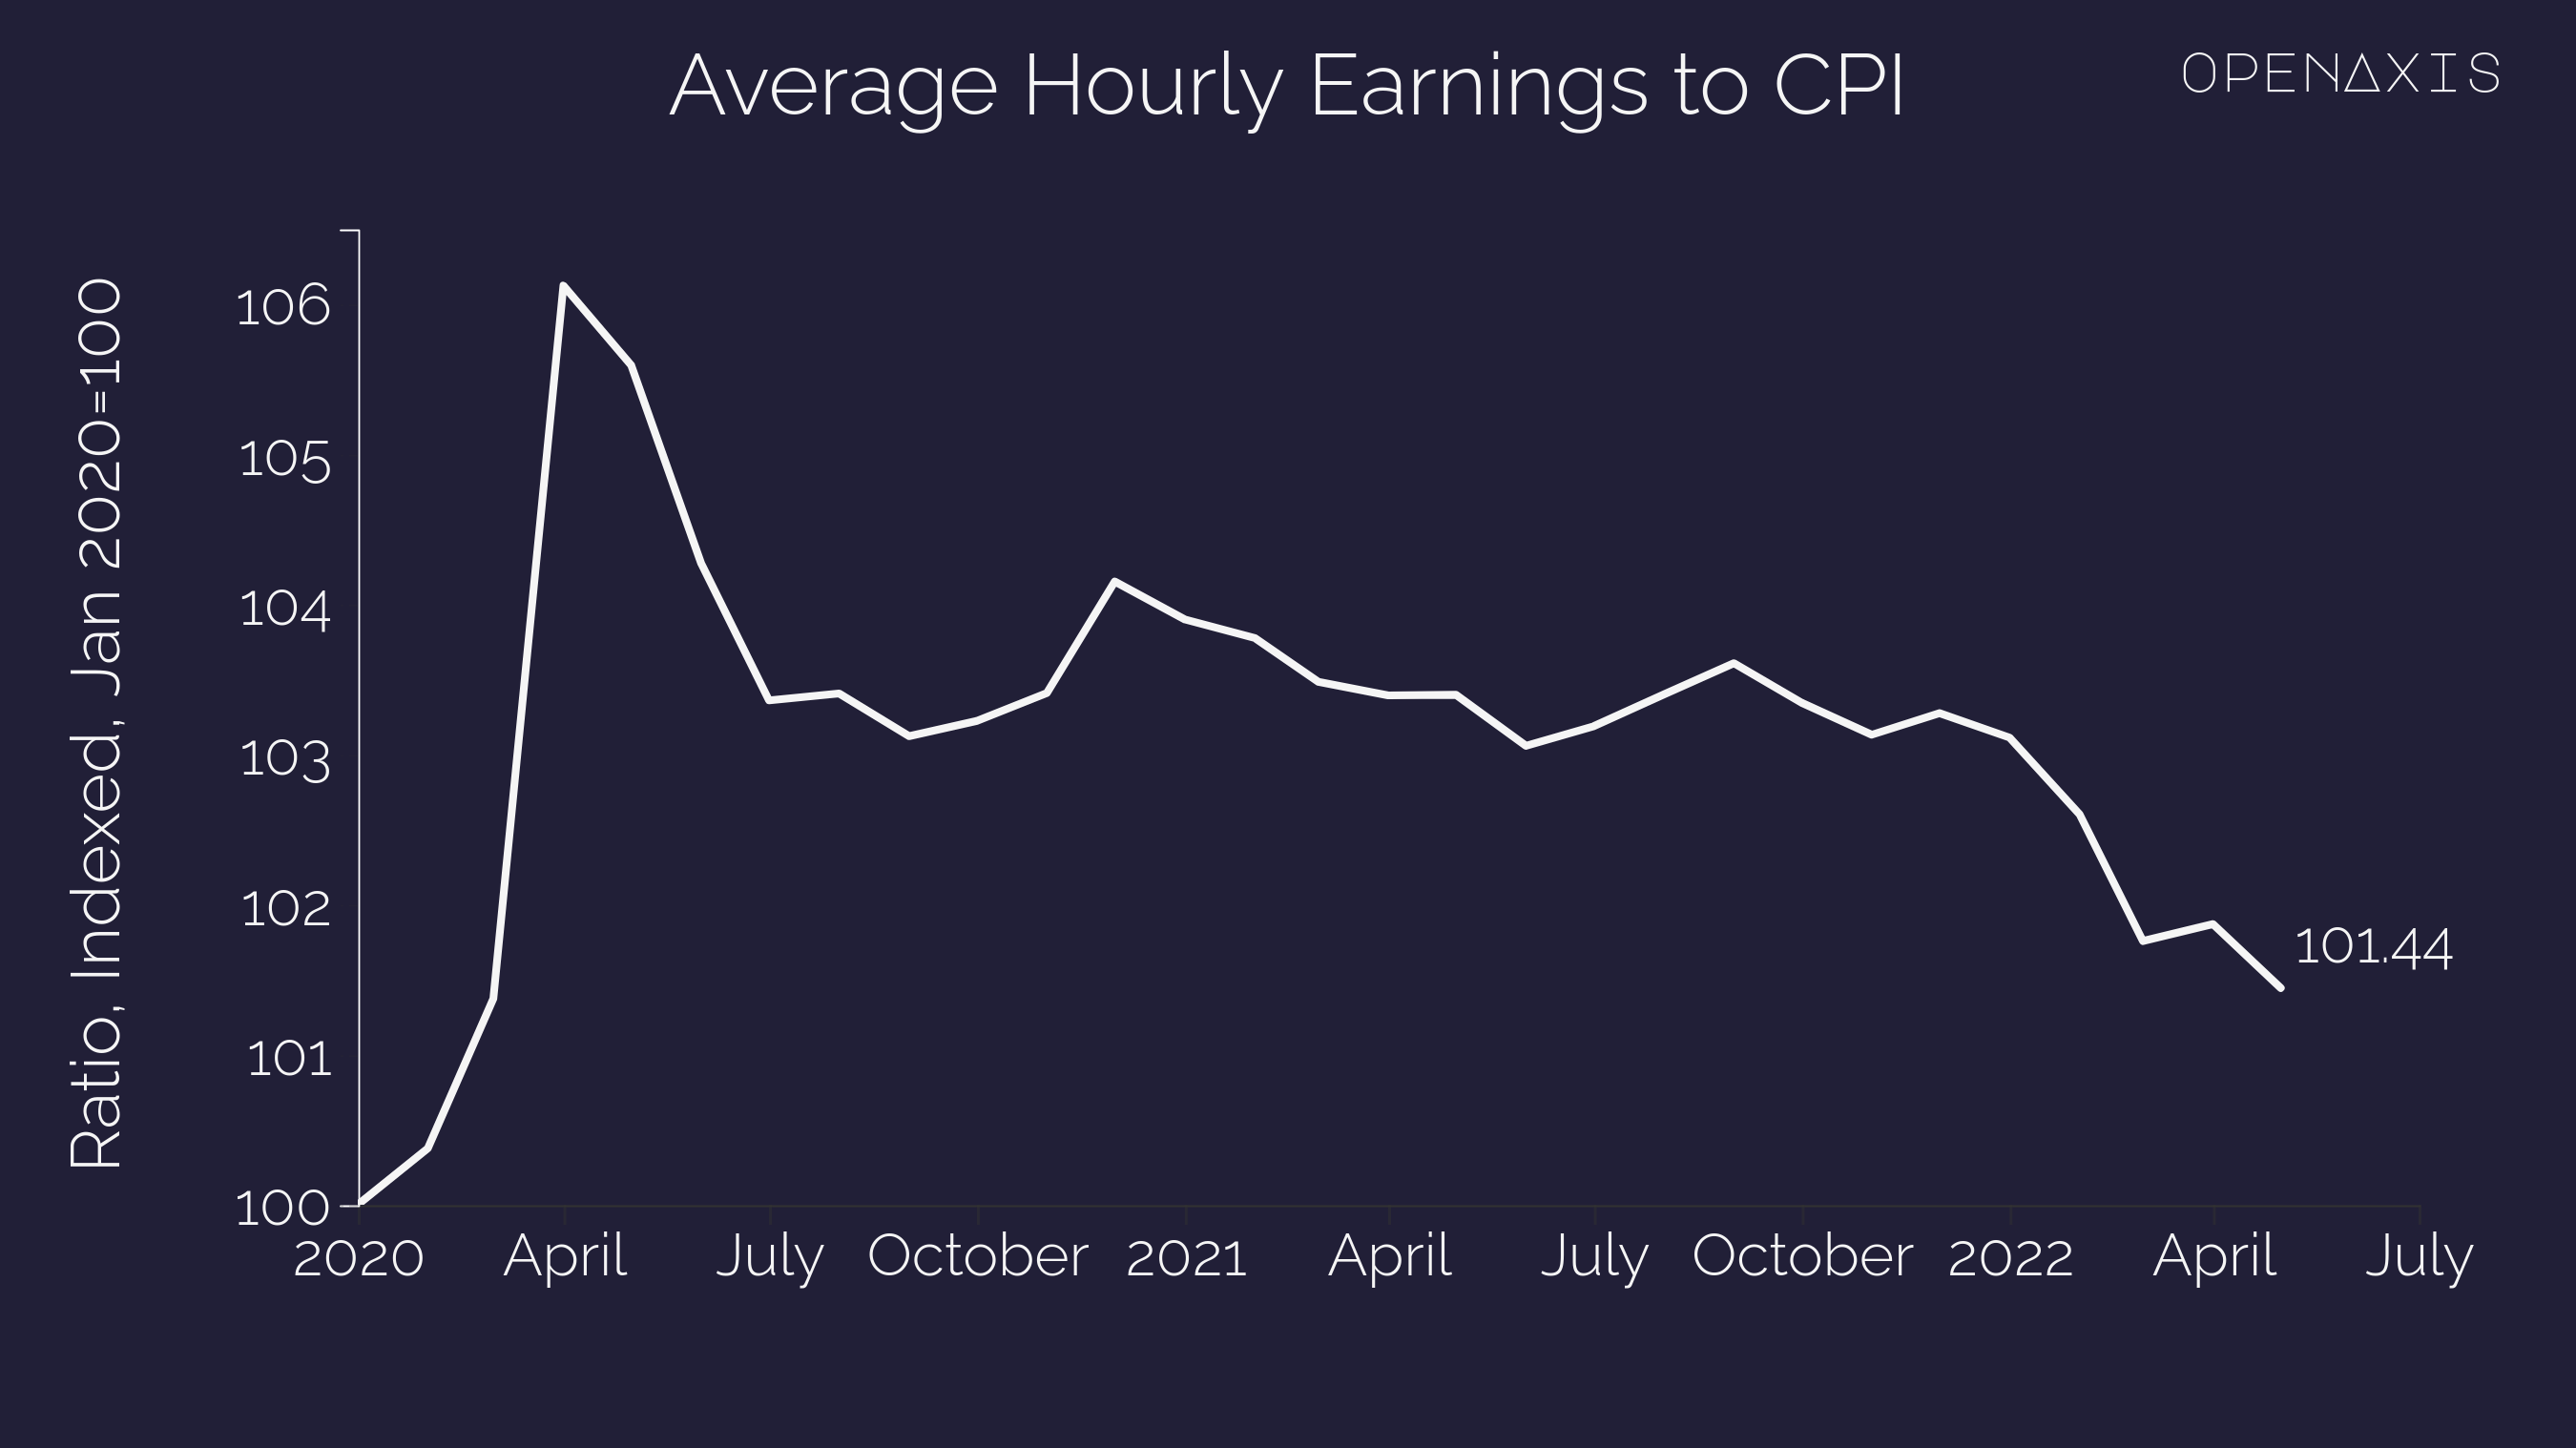 <p>Despite the highest inflation in 40-years, real wages are higher than pre-pandemic as of May 2022. Real wages in May 2022, as calculated by the ratio of Avg. Hrly Earnings to CPI, is actually up 1.4% since Jan 2020.</p><p><br /></p><p><br /></p><p>Average Hourly Earnings are of Production and Nonsupervisory Employees, Total Private, which Paul Krugman used in his Jan 25th op-ed discussing the inflation narrative.</p><p><br /></p><p>Source: <a href="/data/3862" target="_blank">U.S. Bureau of Labor Statistics</a></p>